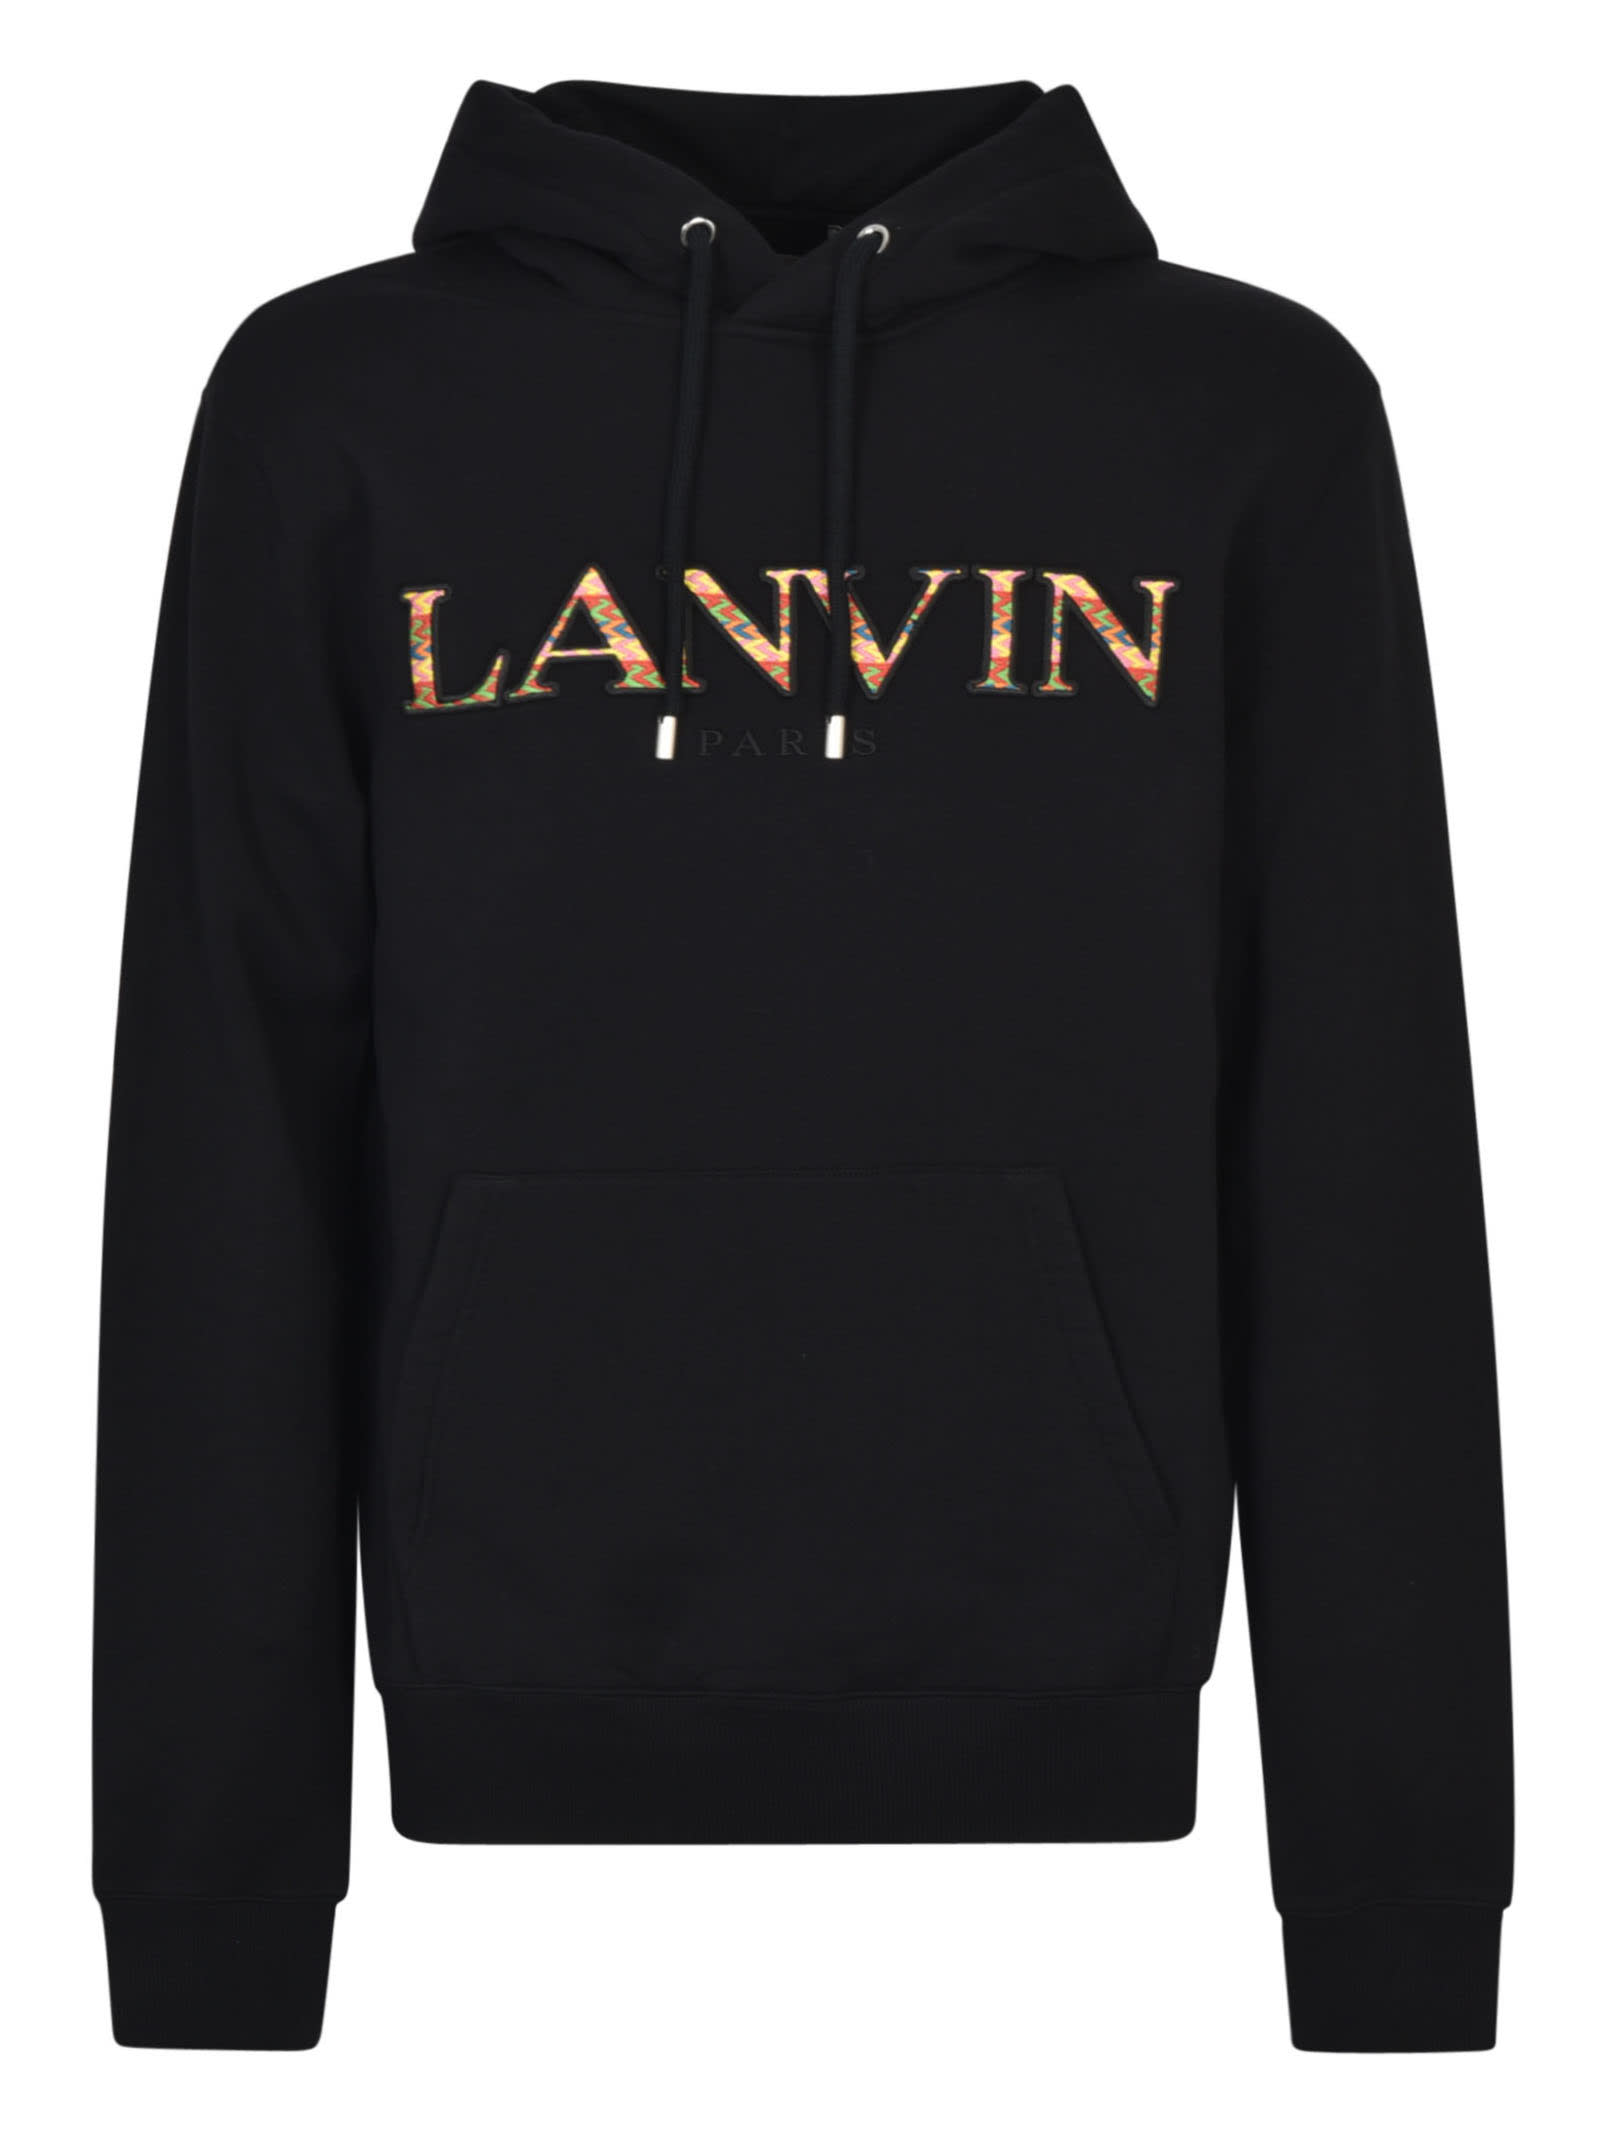 Lanvin Logo Embroidered Hoodie